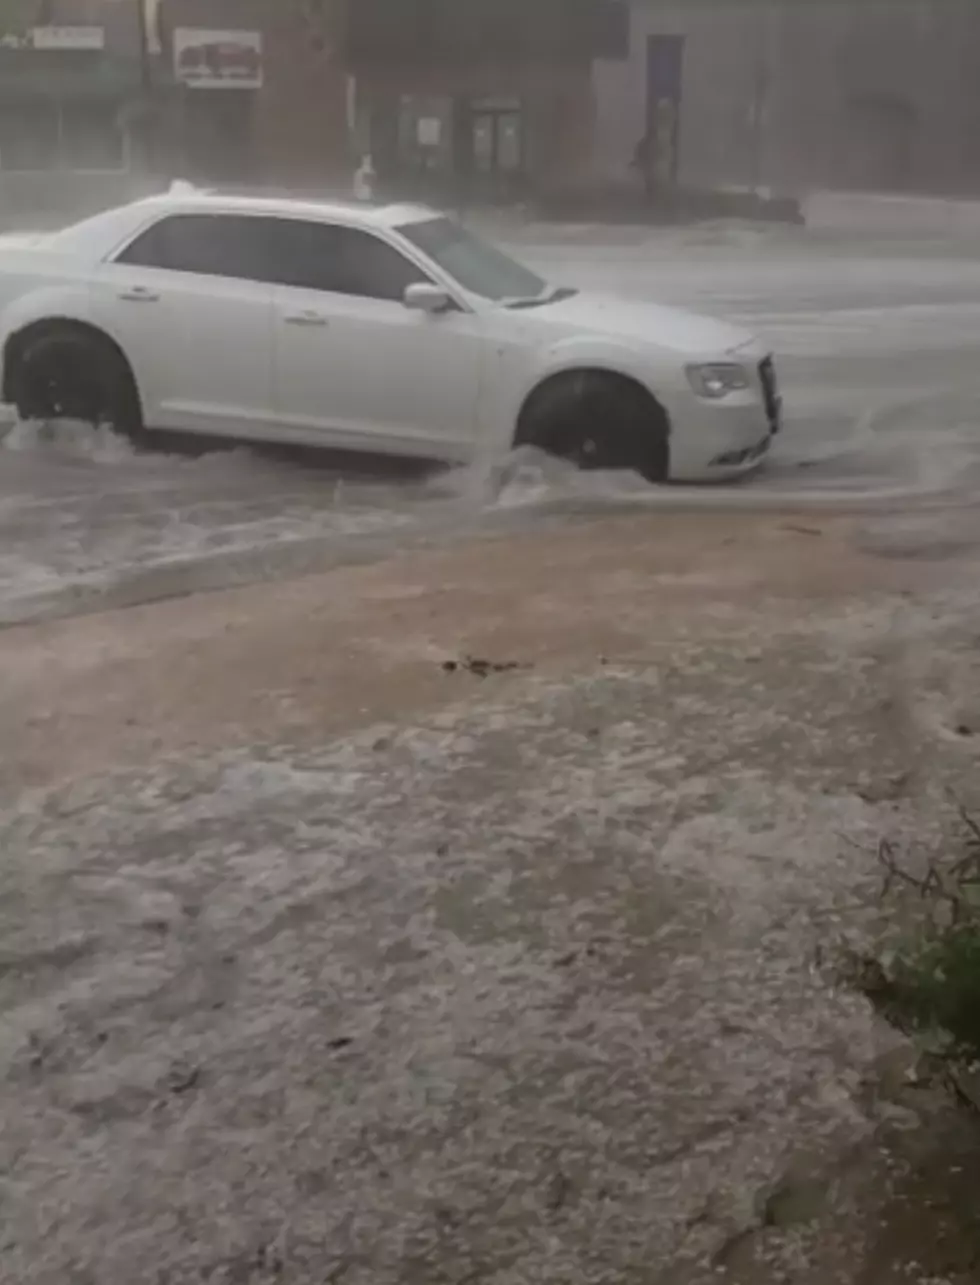 WATCH: Crazy Hail and Flooding in Gillette, Wyoming